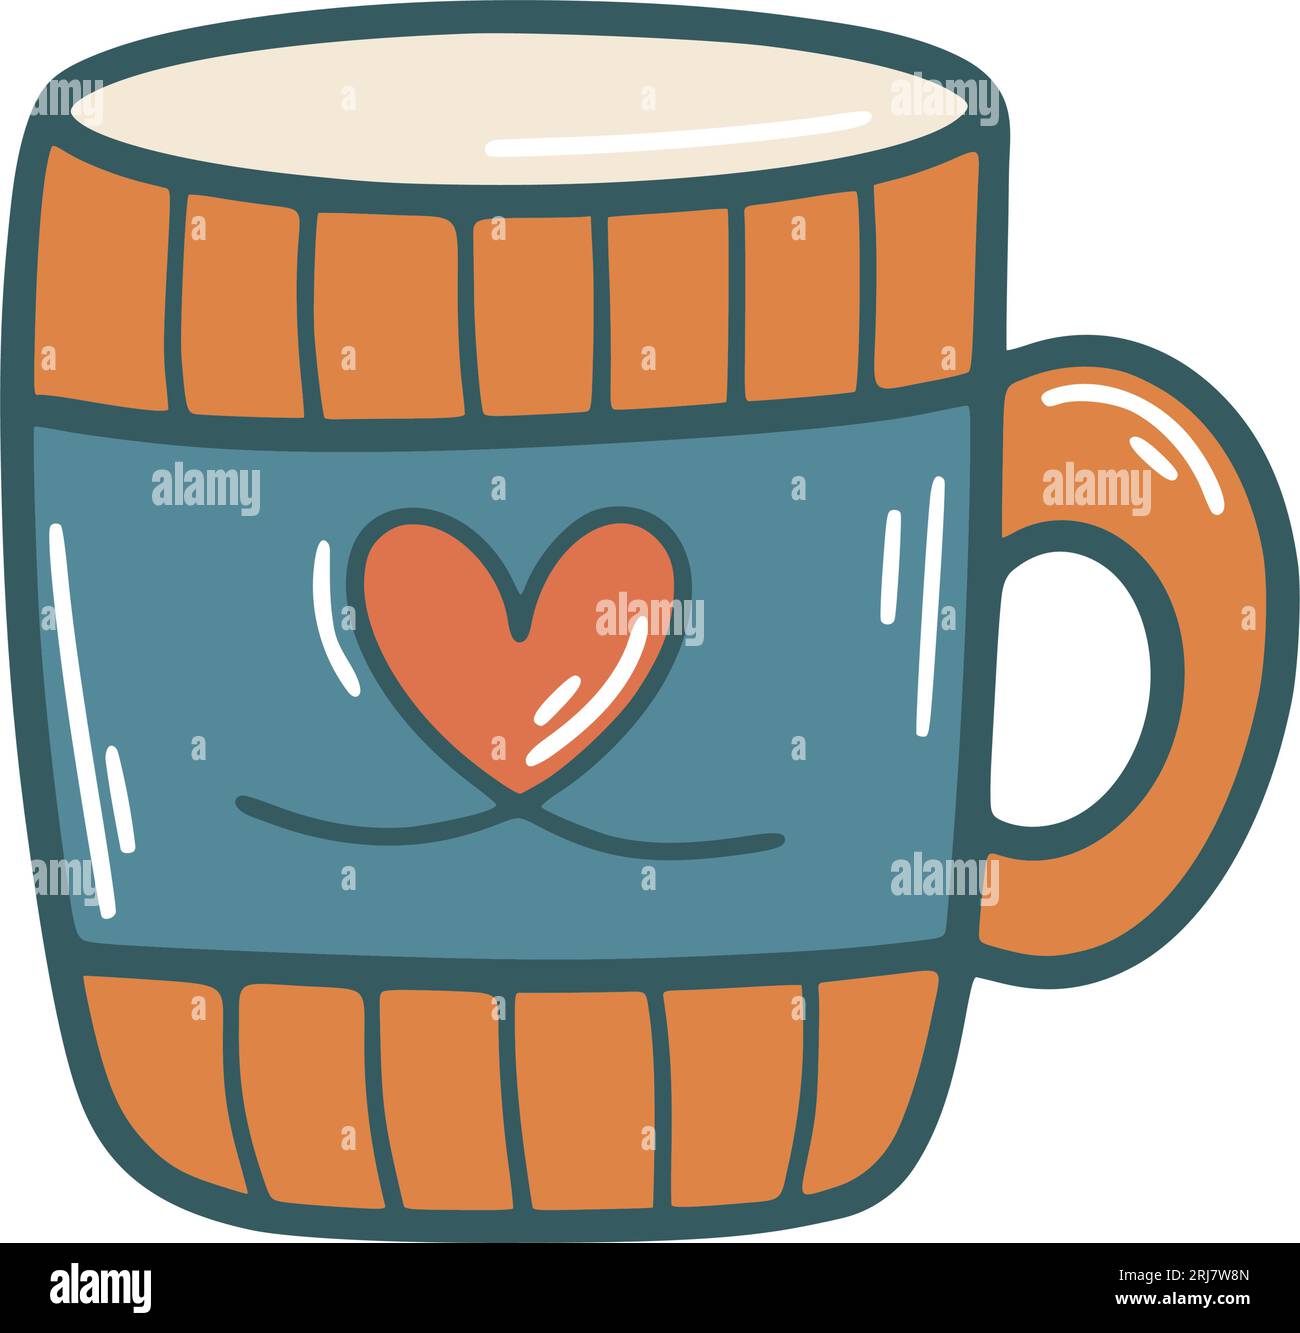 https://c8.alamy.com/comp/2RJ7W8N/cozy-cup-with-heart-vector-illustration-cute-mug-with-hot-drink-isolated-doodle-style-picture-2RJ7W8N.jpg